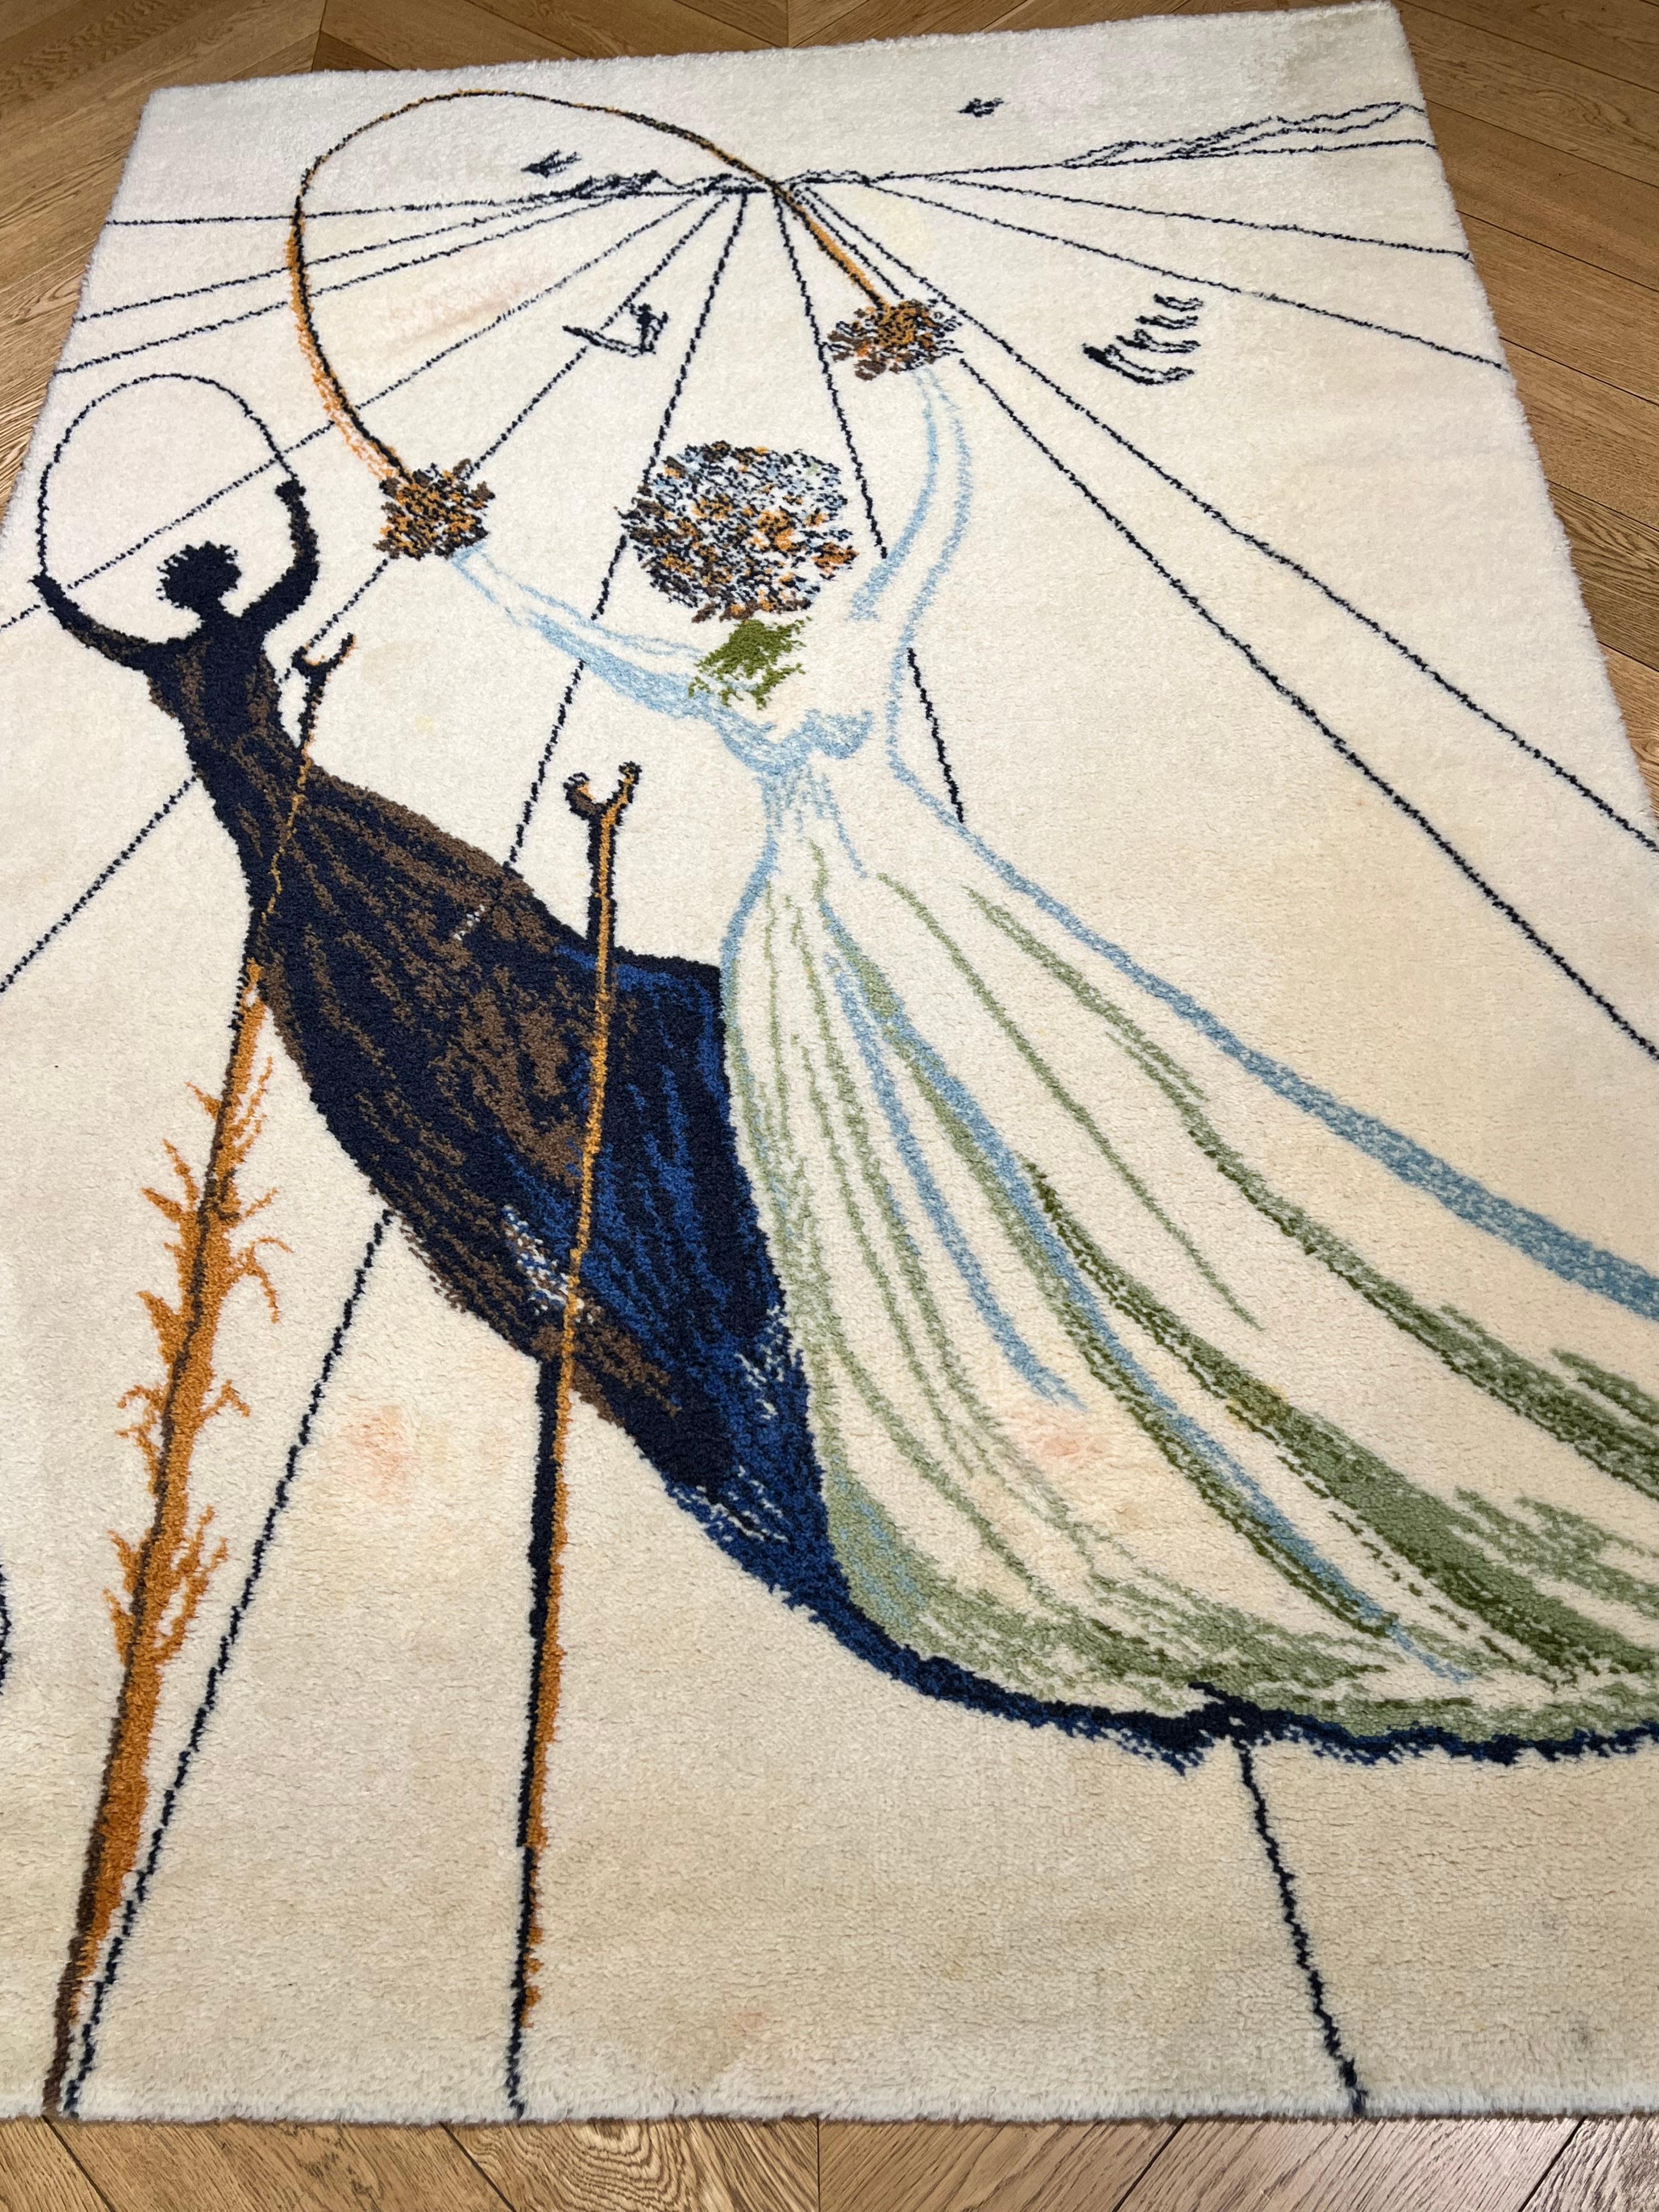 Hand-Woven 20th Century White and Blue Alice in Wonderland Salvador Dalí Rug, ca 1977 For Sale